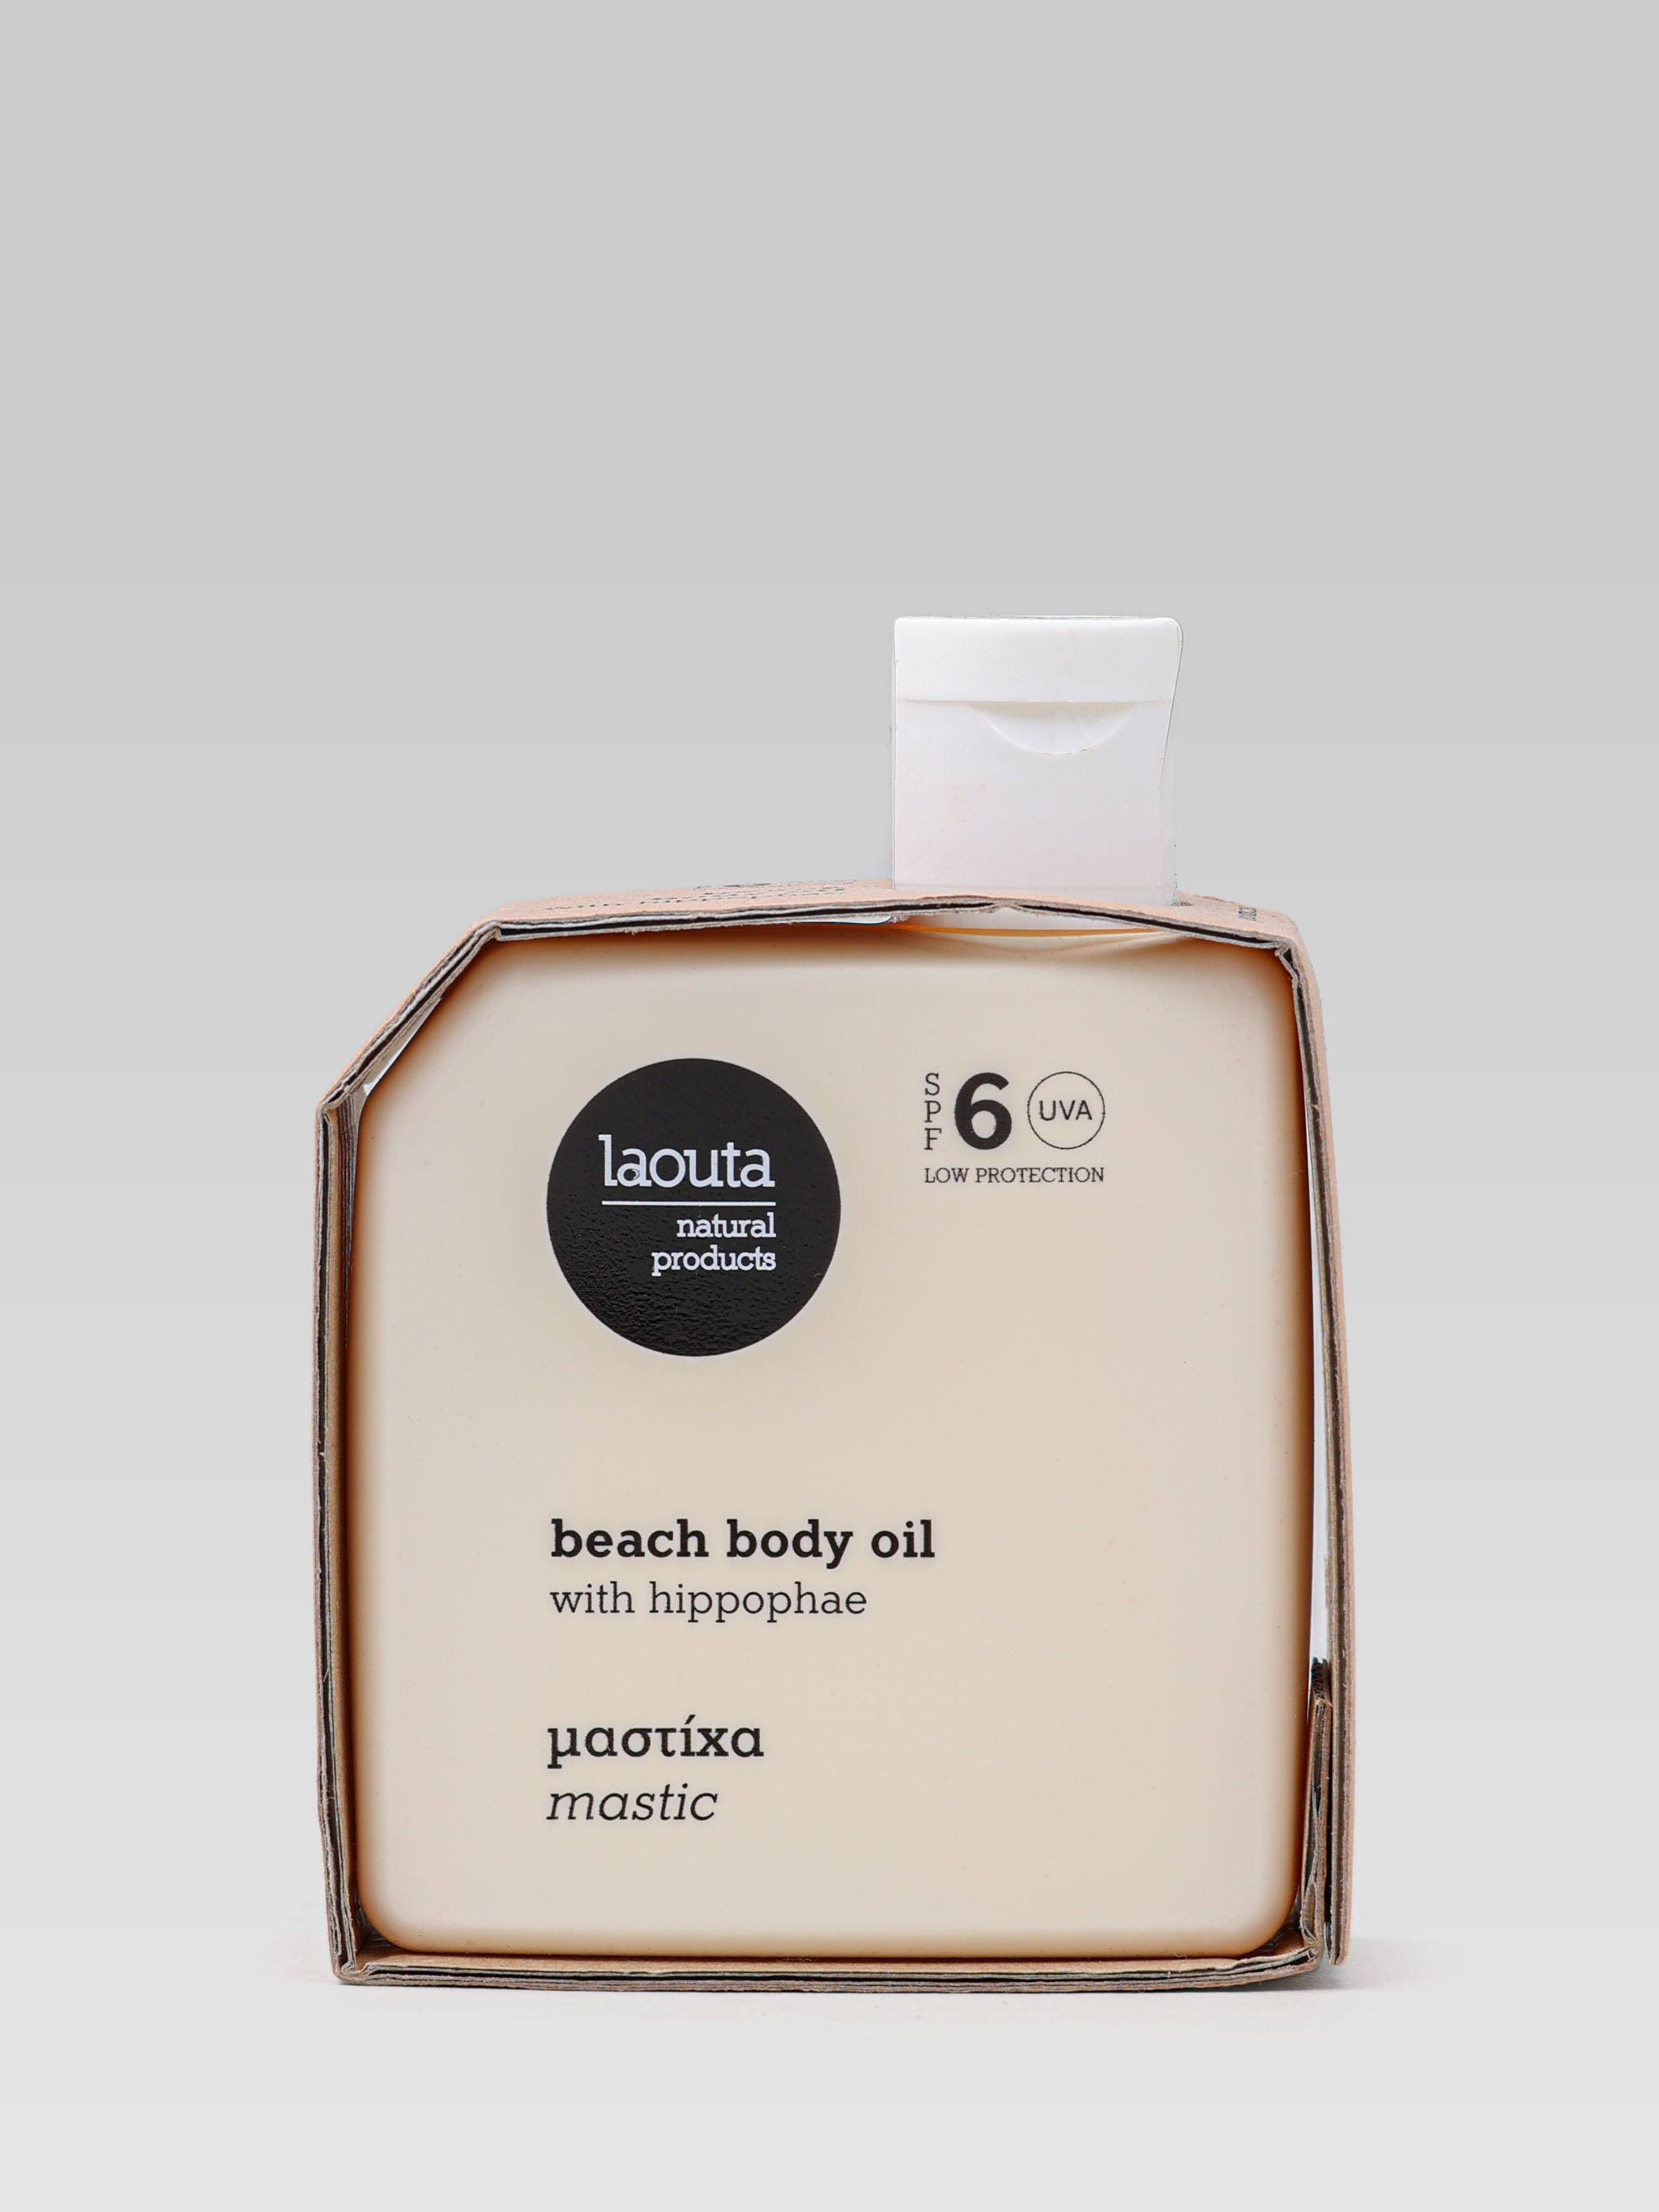 LAOUTA Beach Body Oil With Hippophae in Mastic product shot